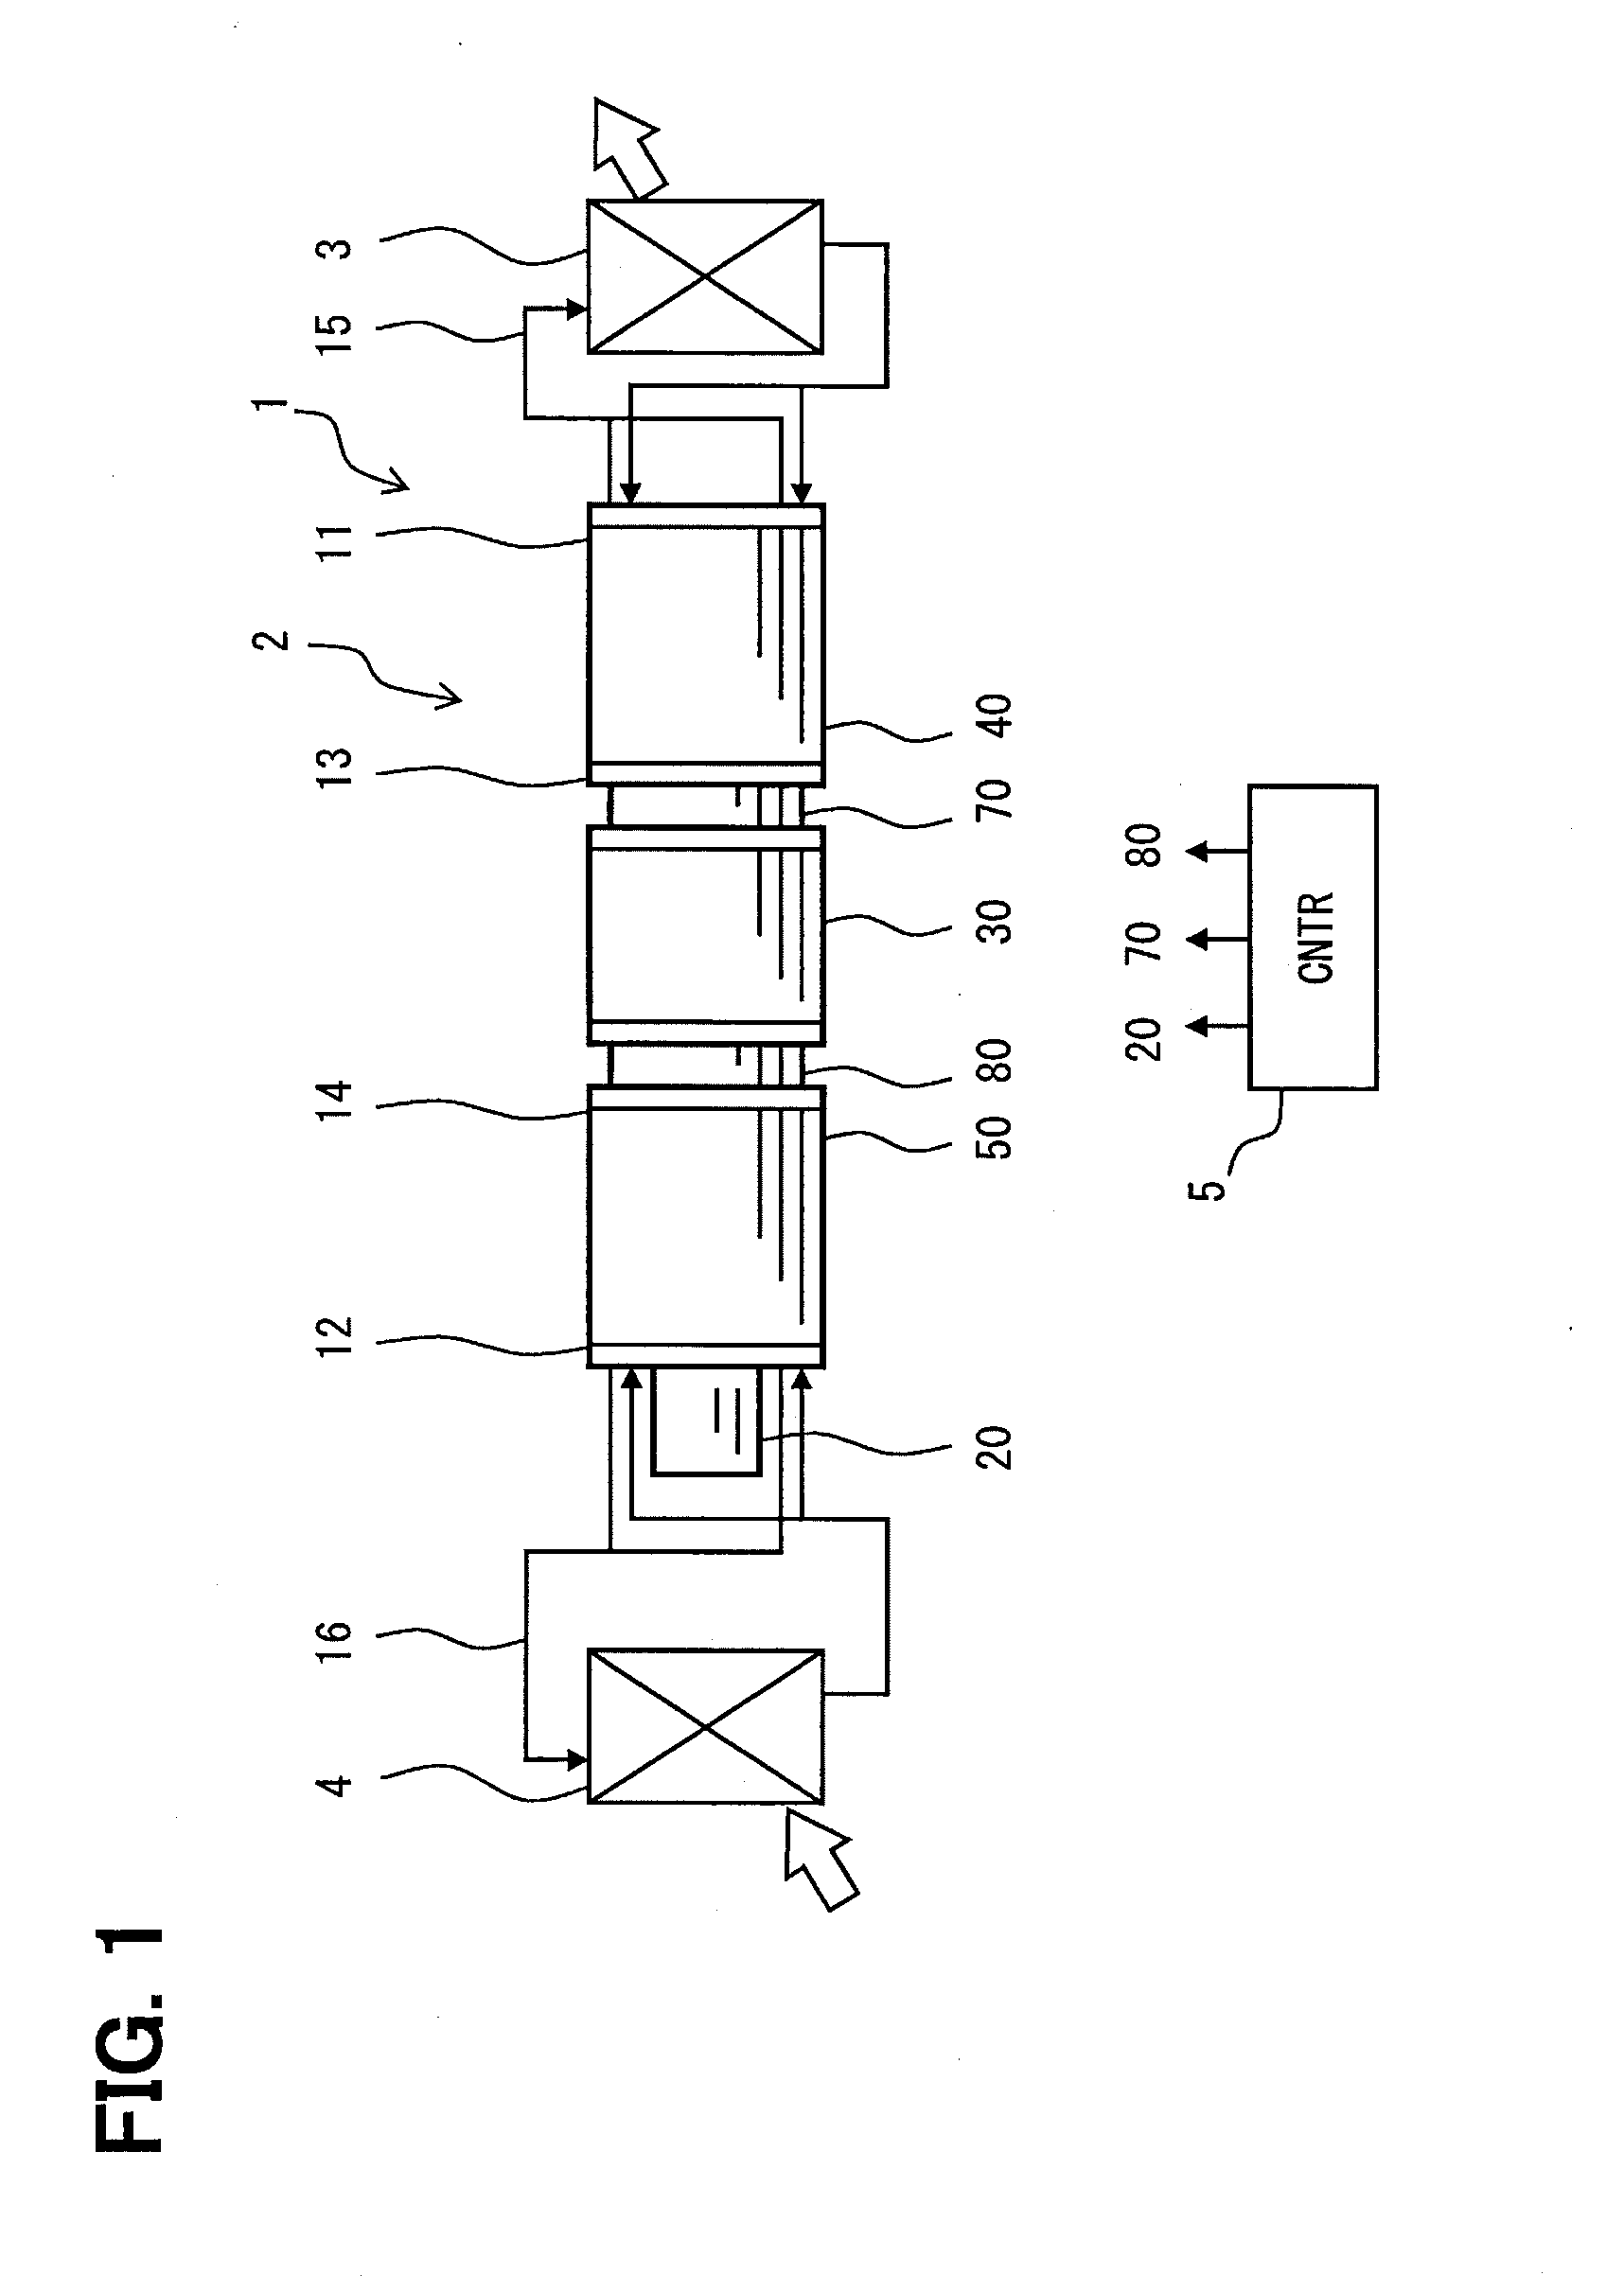 Magneto-caloric effect element and thermo-magnetic cycle apparatus